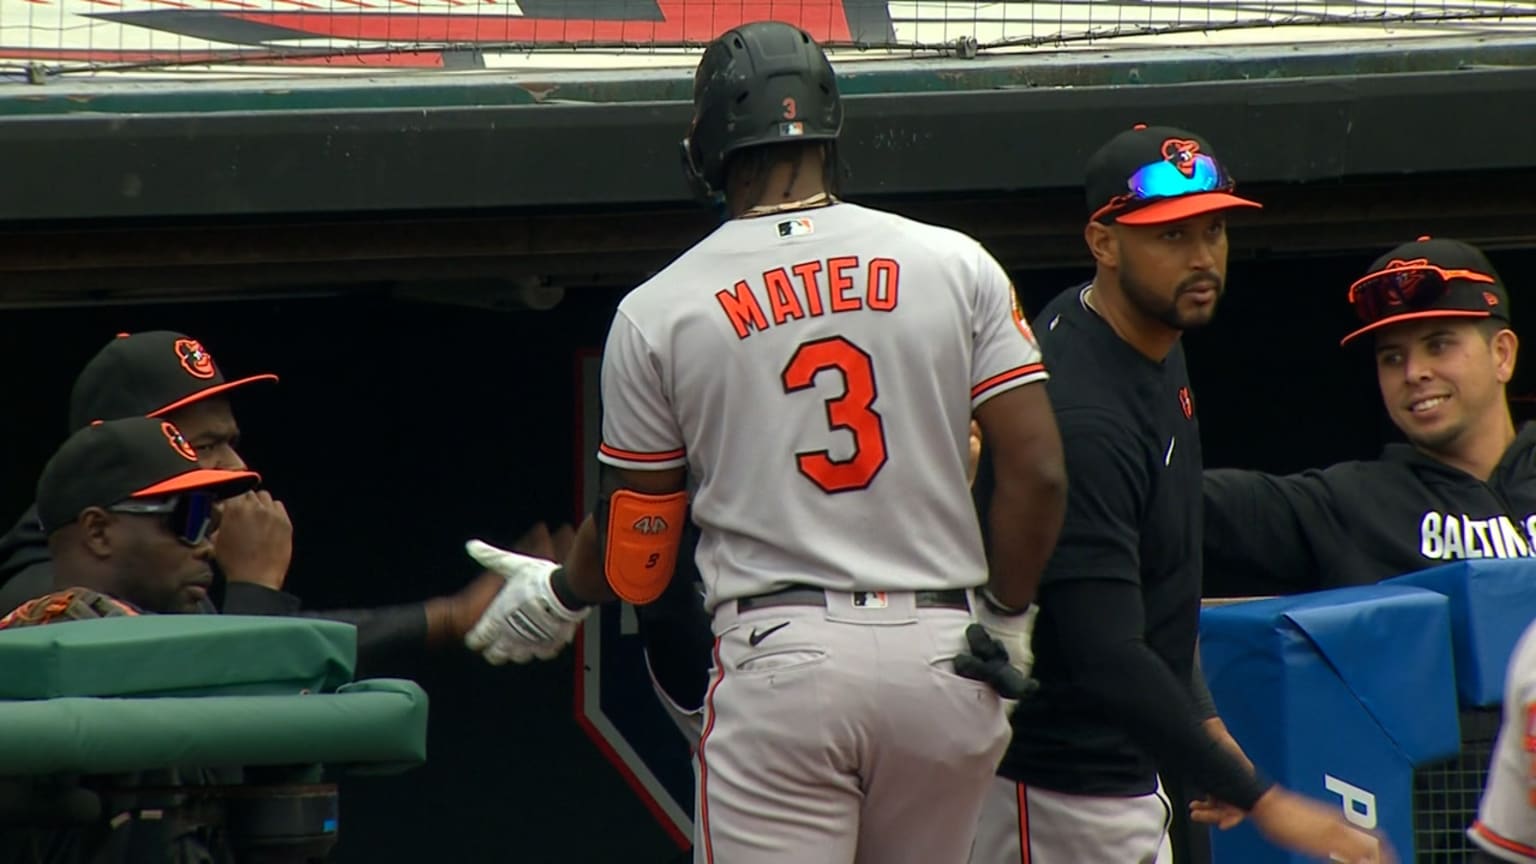 For Orioles shortstop Jorge Mateo, remarkable has become routine